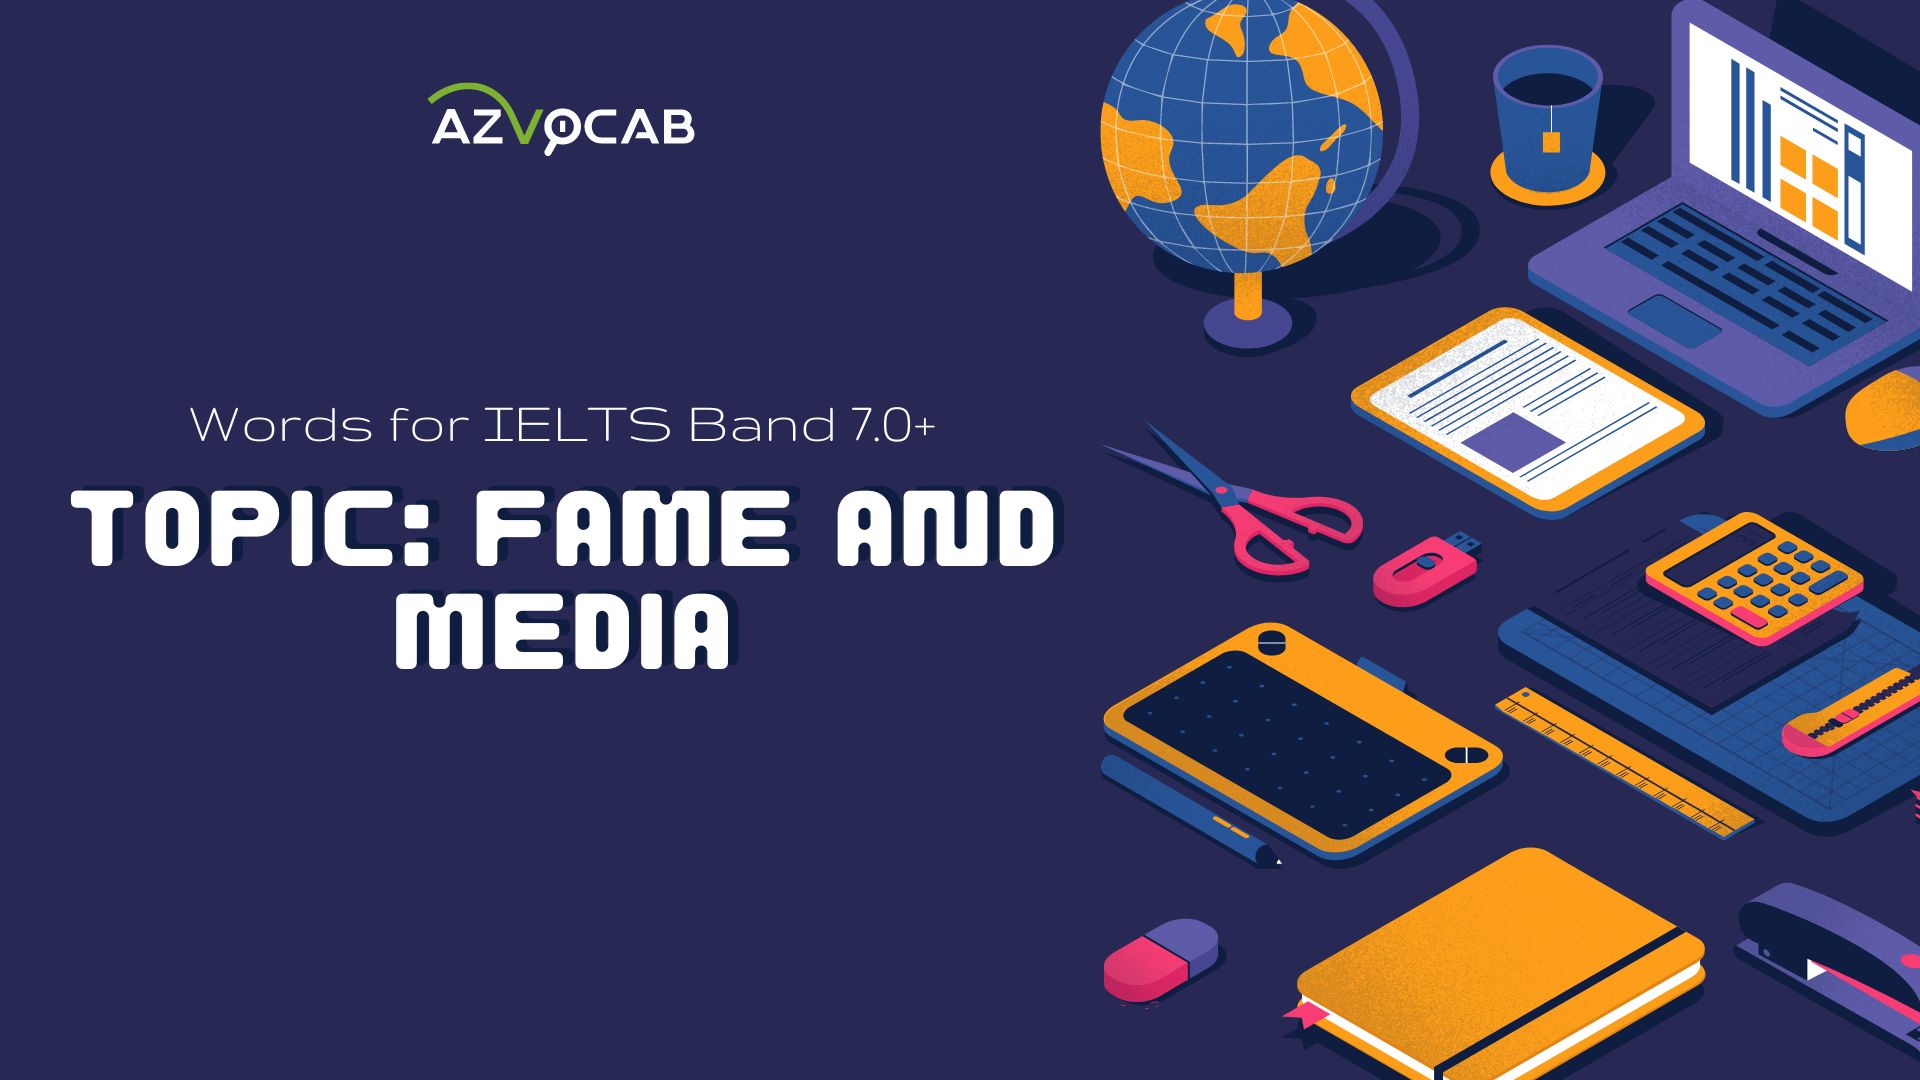 Essential Fame & Media IELTS Vocabulary for IELTS band 7.0+